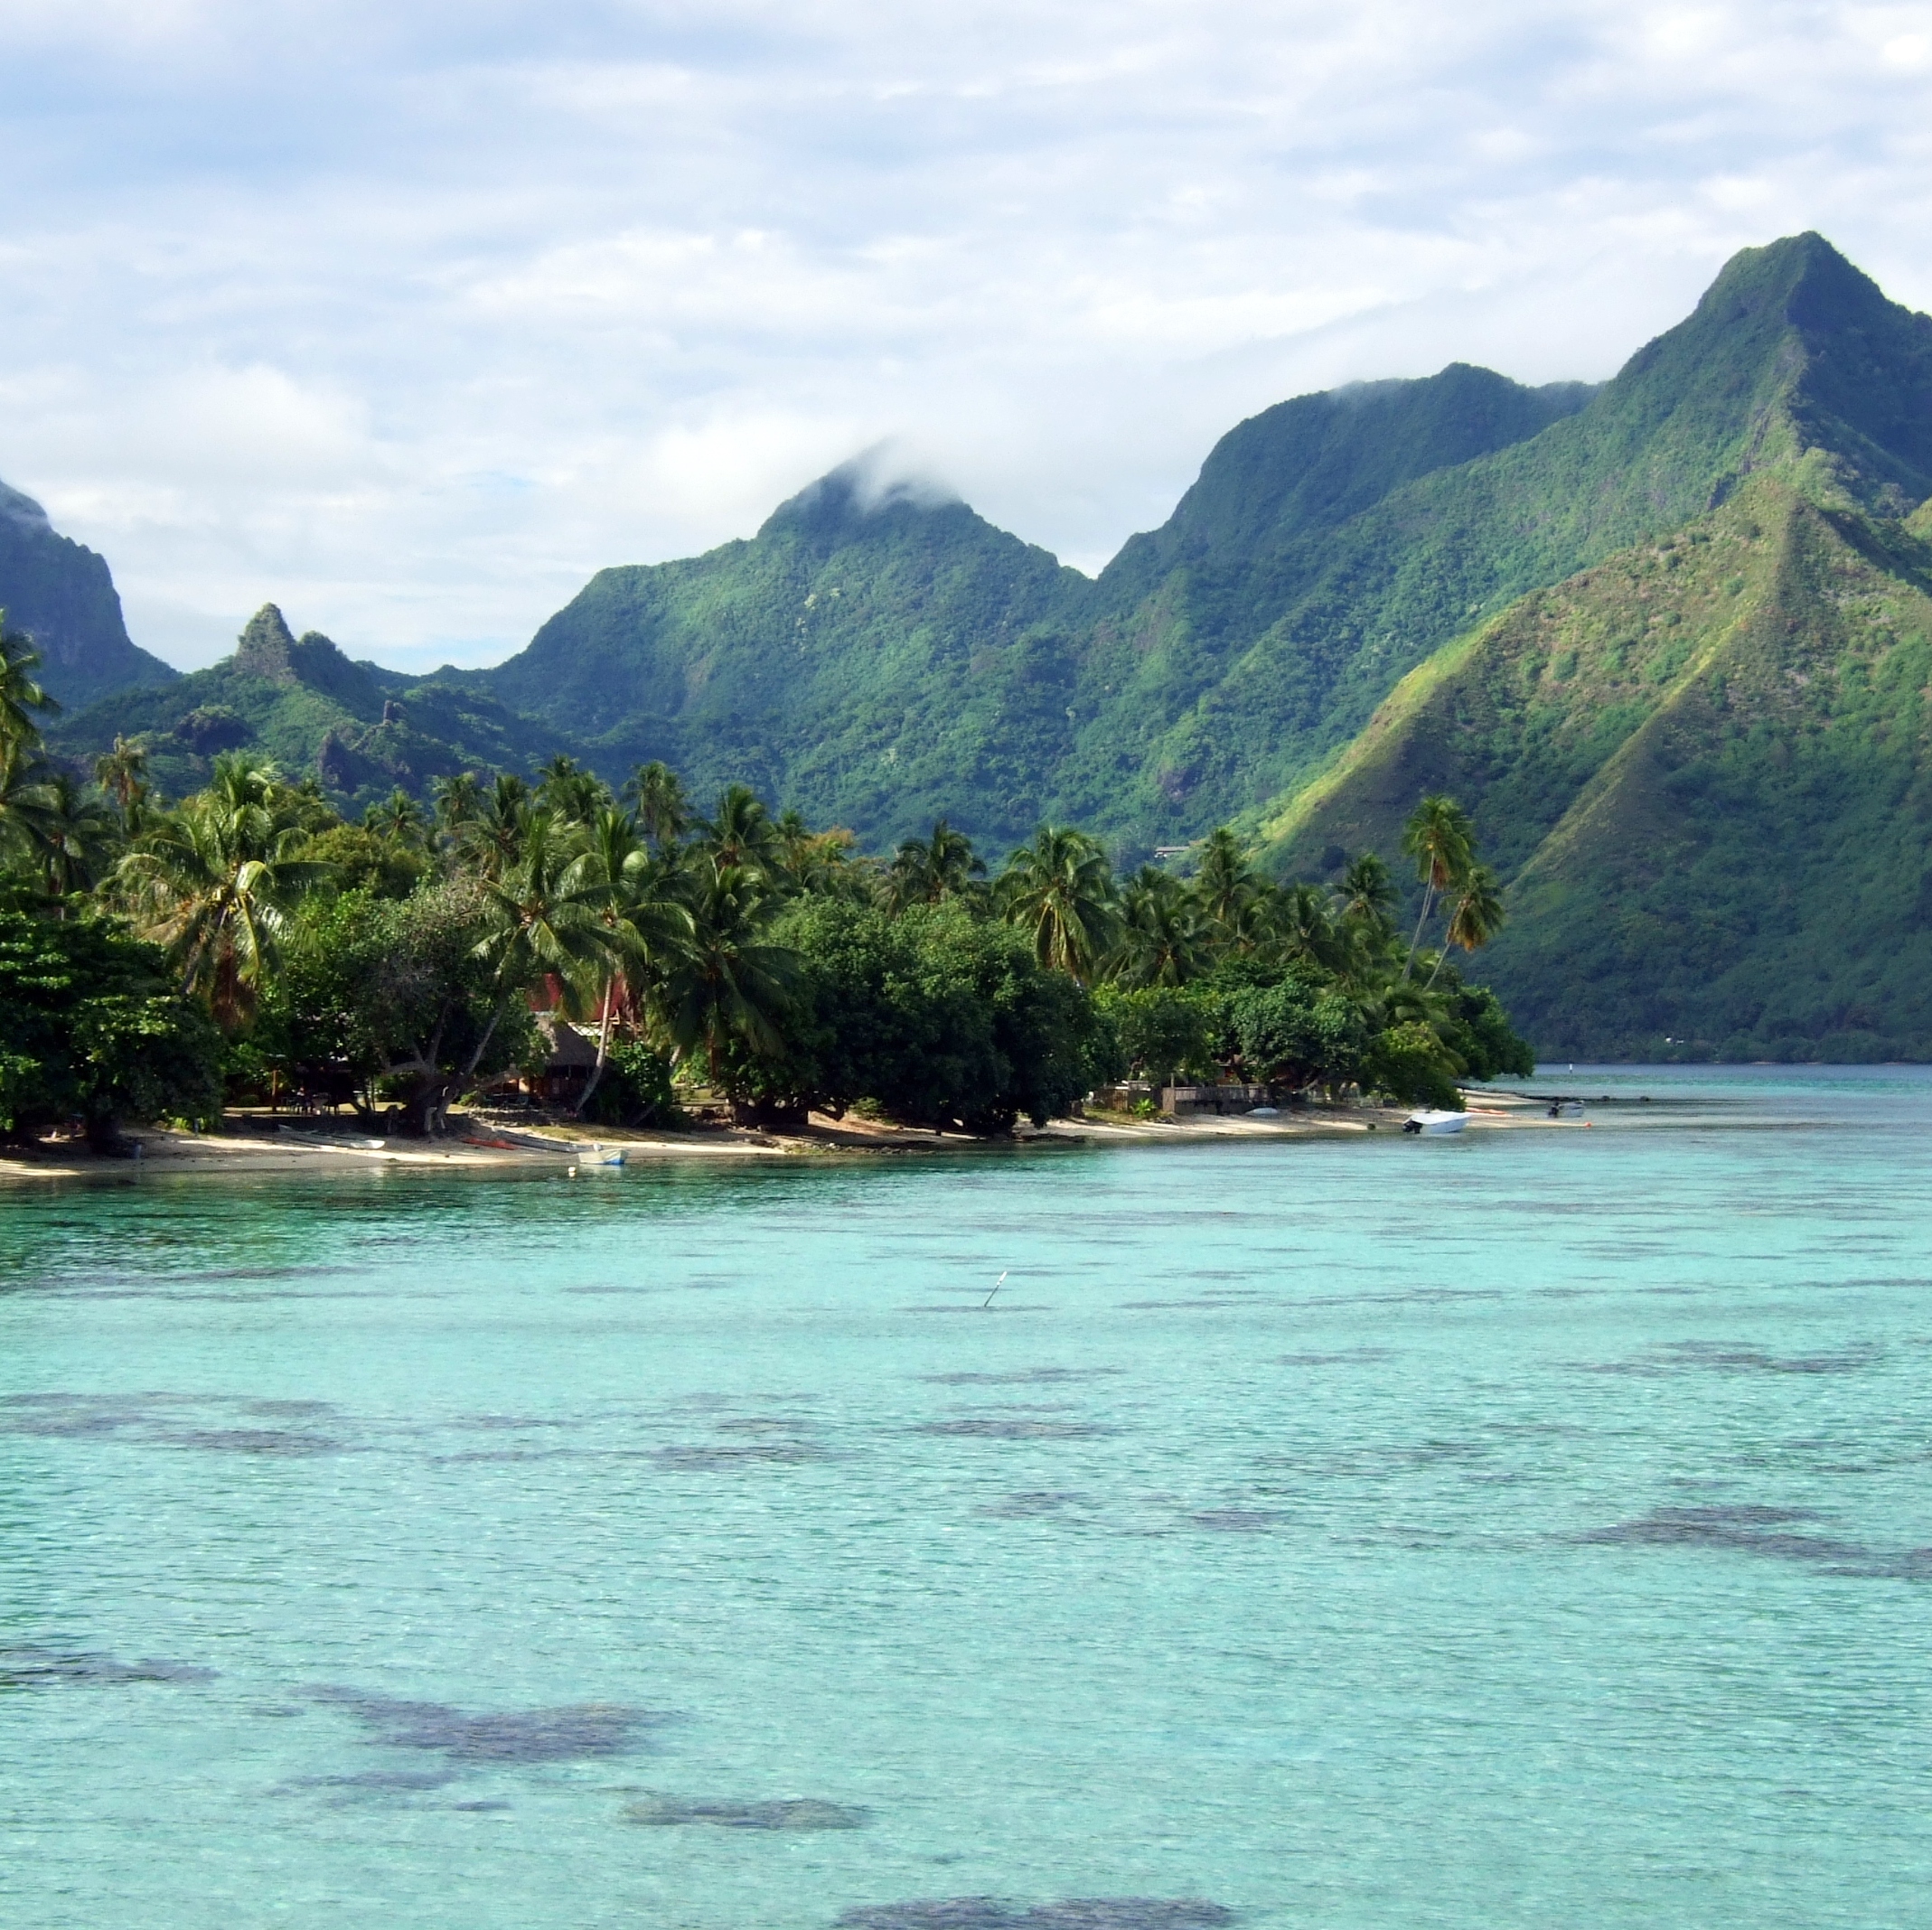 Moorea Island. It is part of French Polynesia, which has 118 islands, including 84 or 20% of the planet’s atolls - ring-shaped tropical islands, which enclose a lagoon in their centre